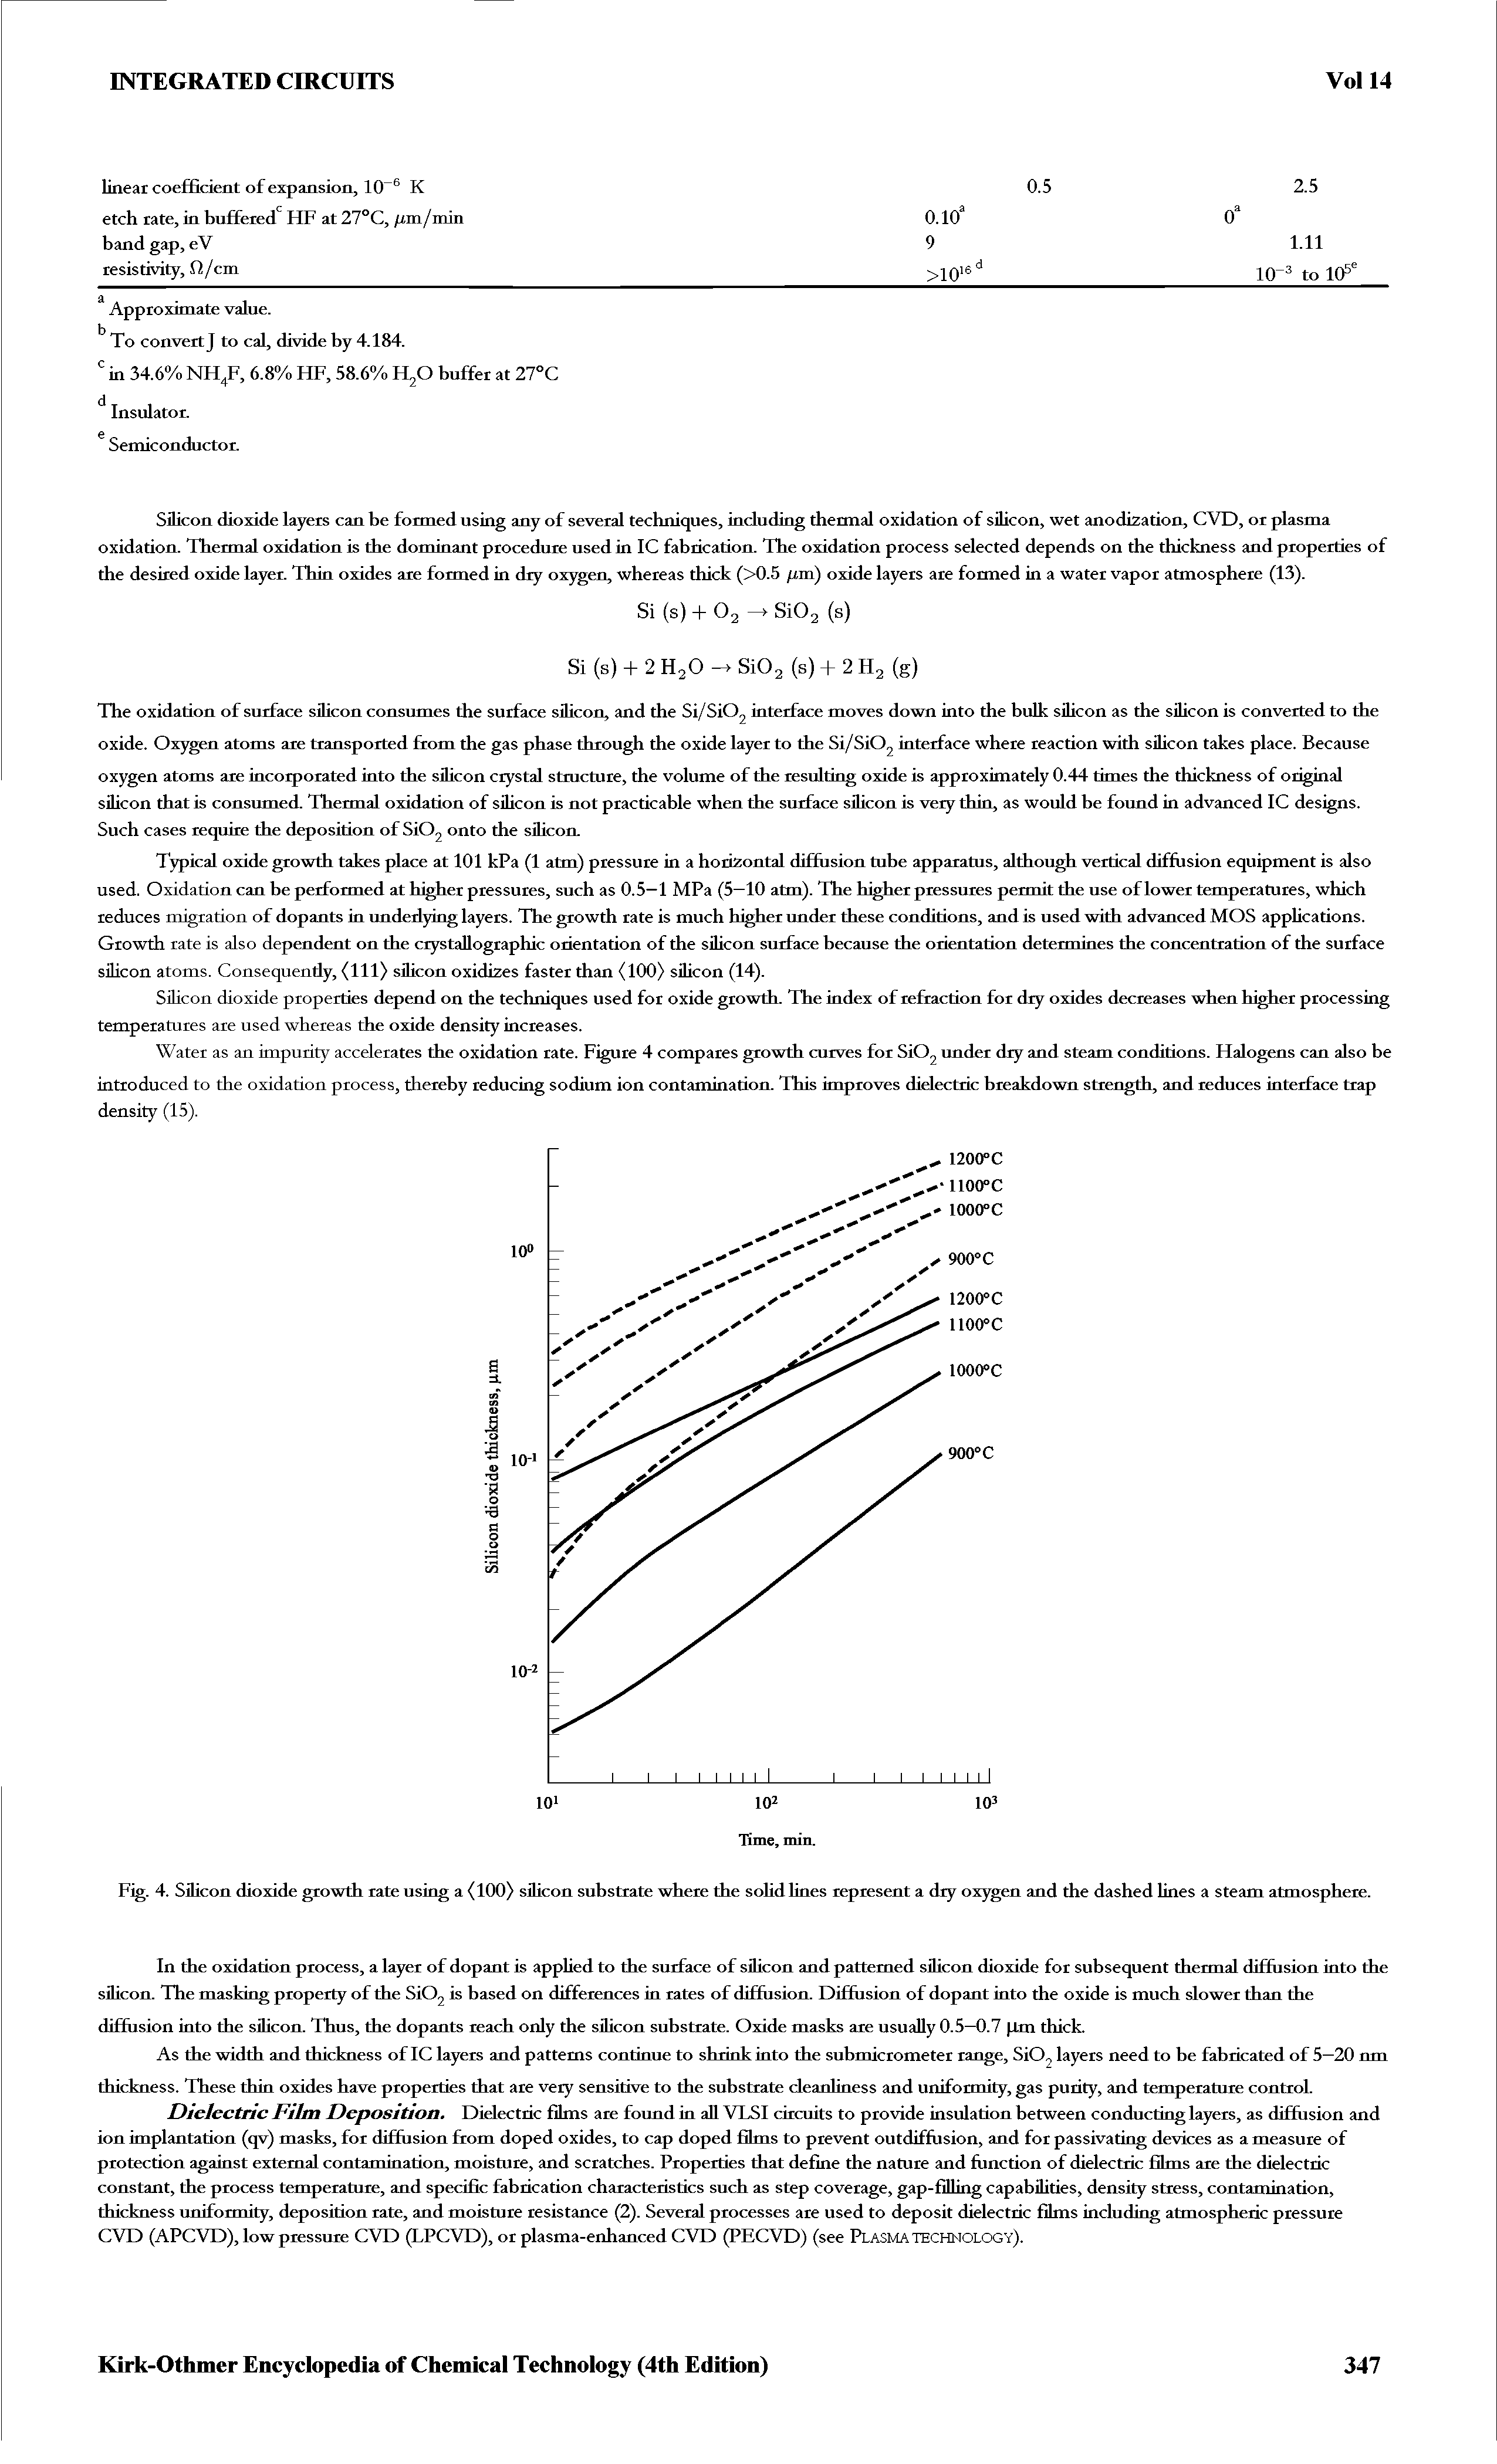 Fig. 4. Silicon dioxide growth rate using a (100) silicon substrate where the solid lines represent a dry oxygen and the dashed lines a steam atmosphere.